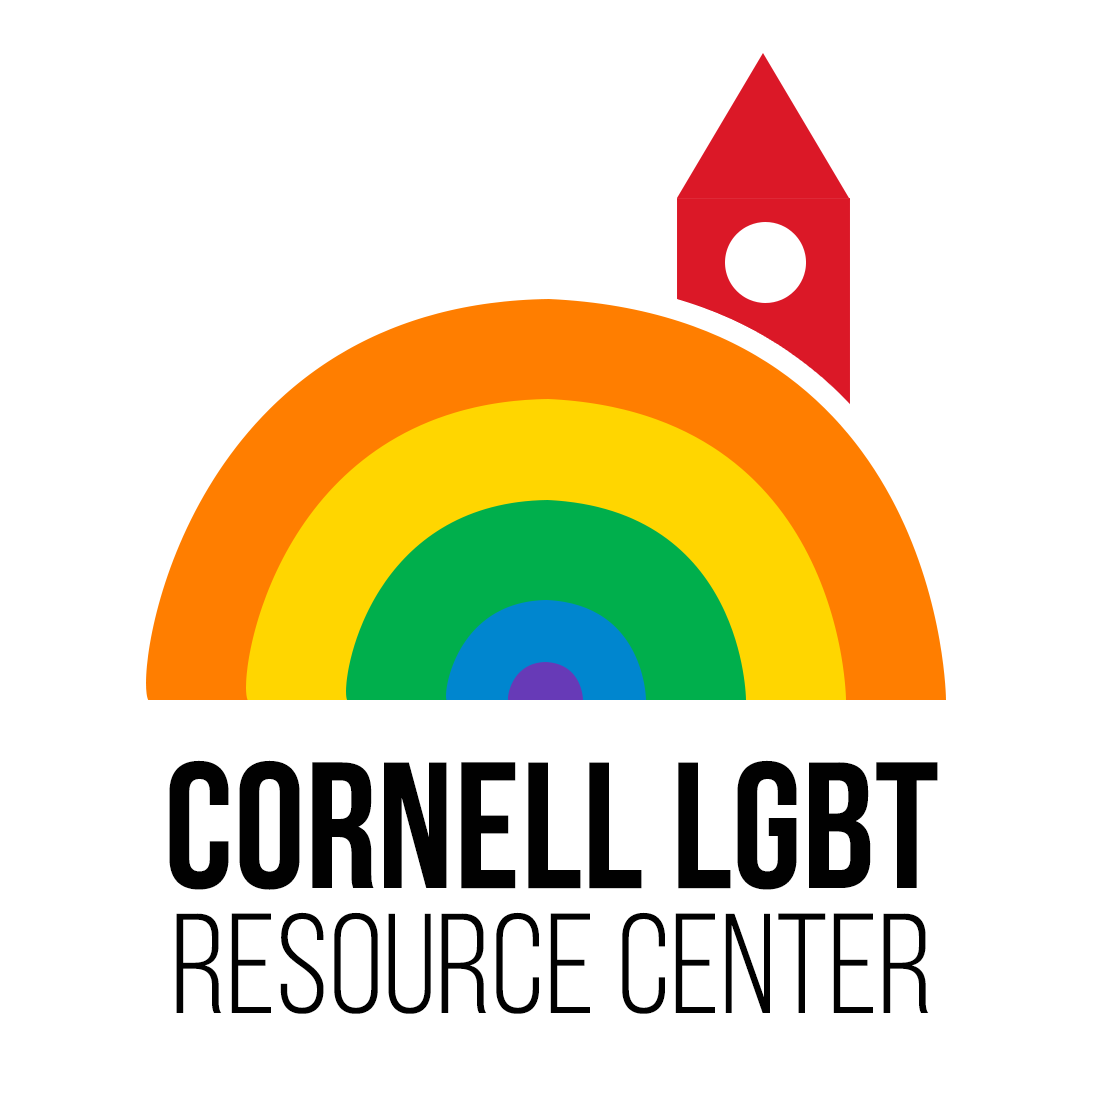  This logo currently used by Cornell's LGBT+ Resource Center was created to coincide well with the Women's Resource Logo, while being it's own identity. Friendly bright colors are welcoming, and the red Cornell clock tower ties the center to the univ